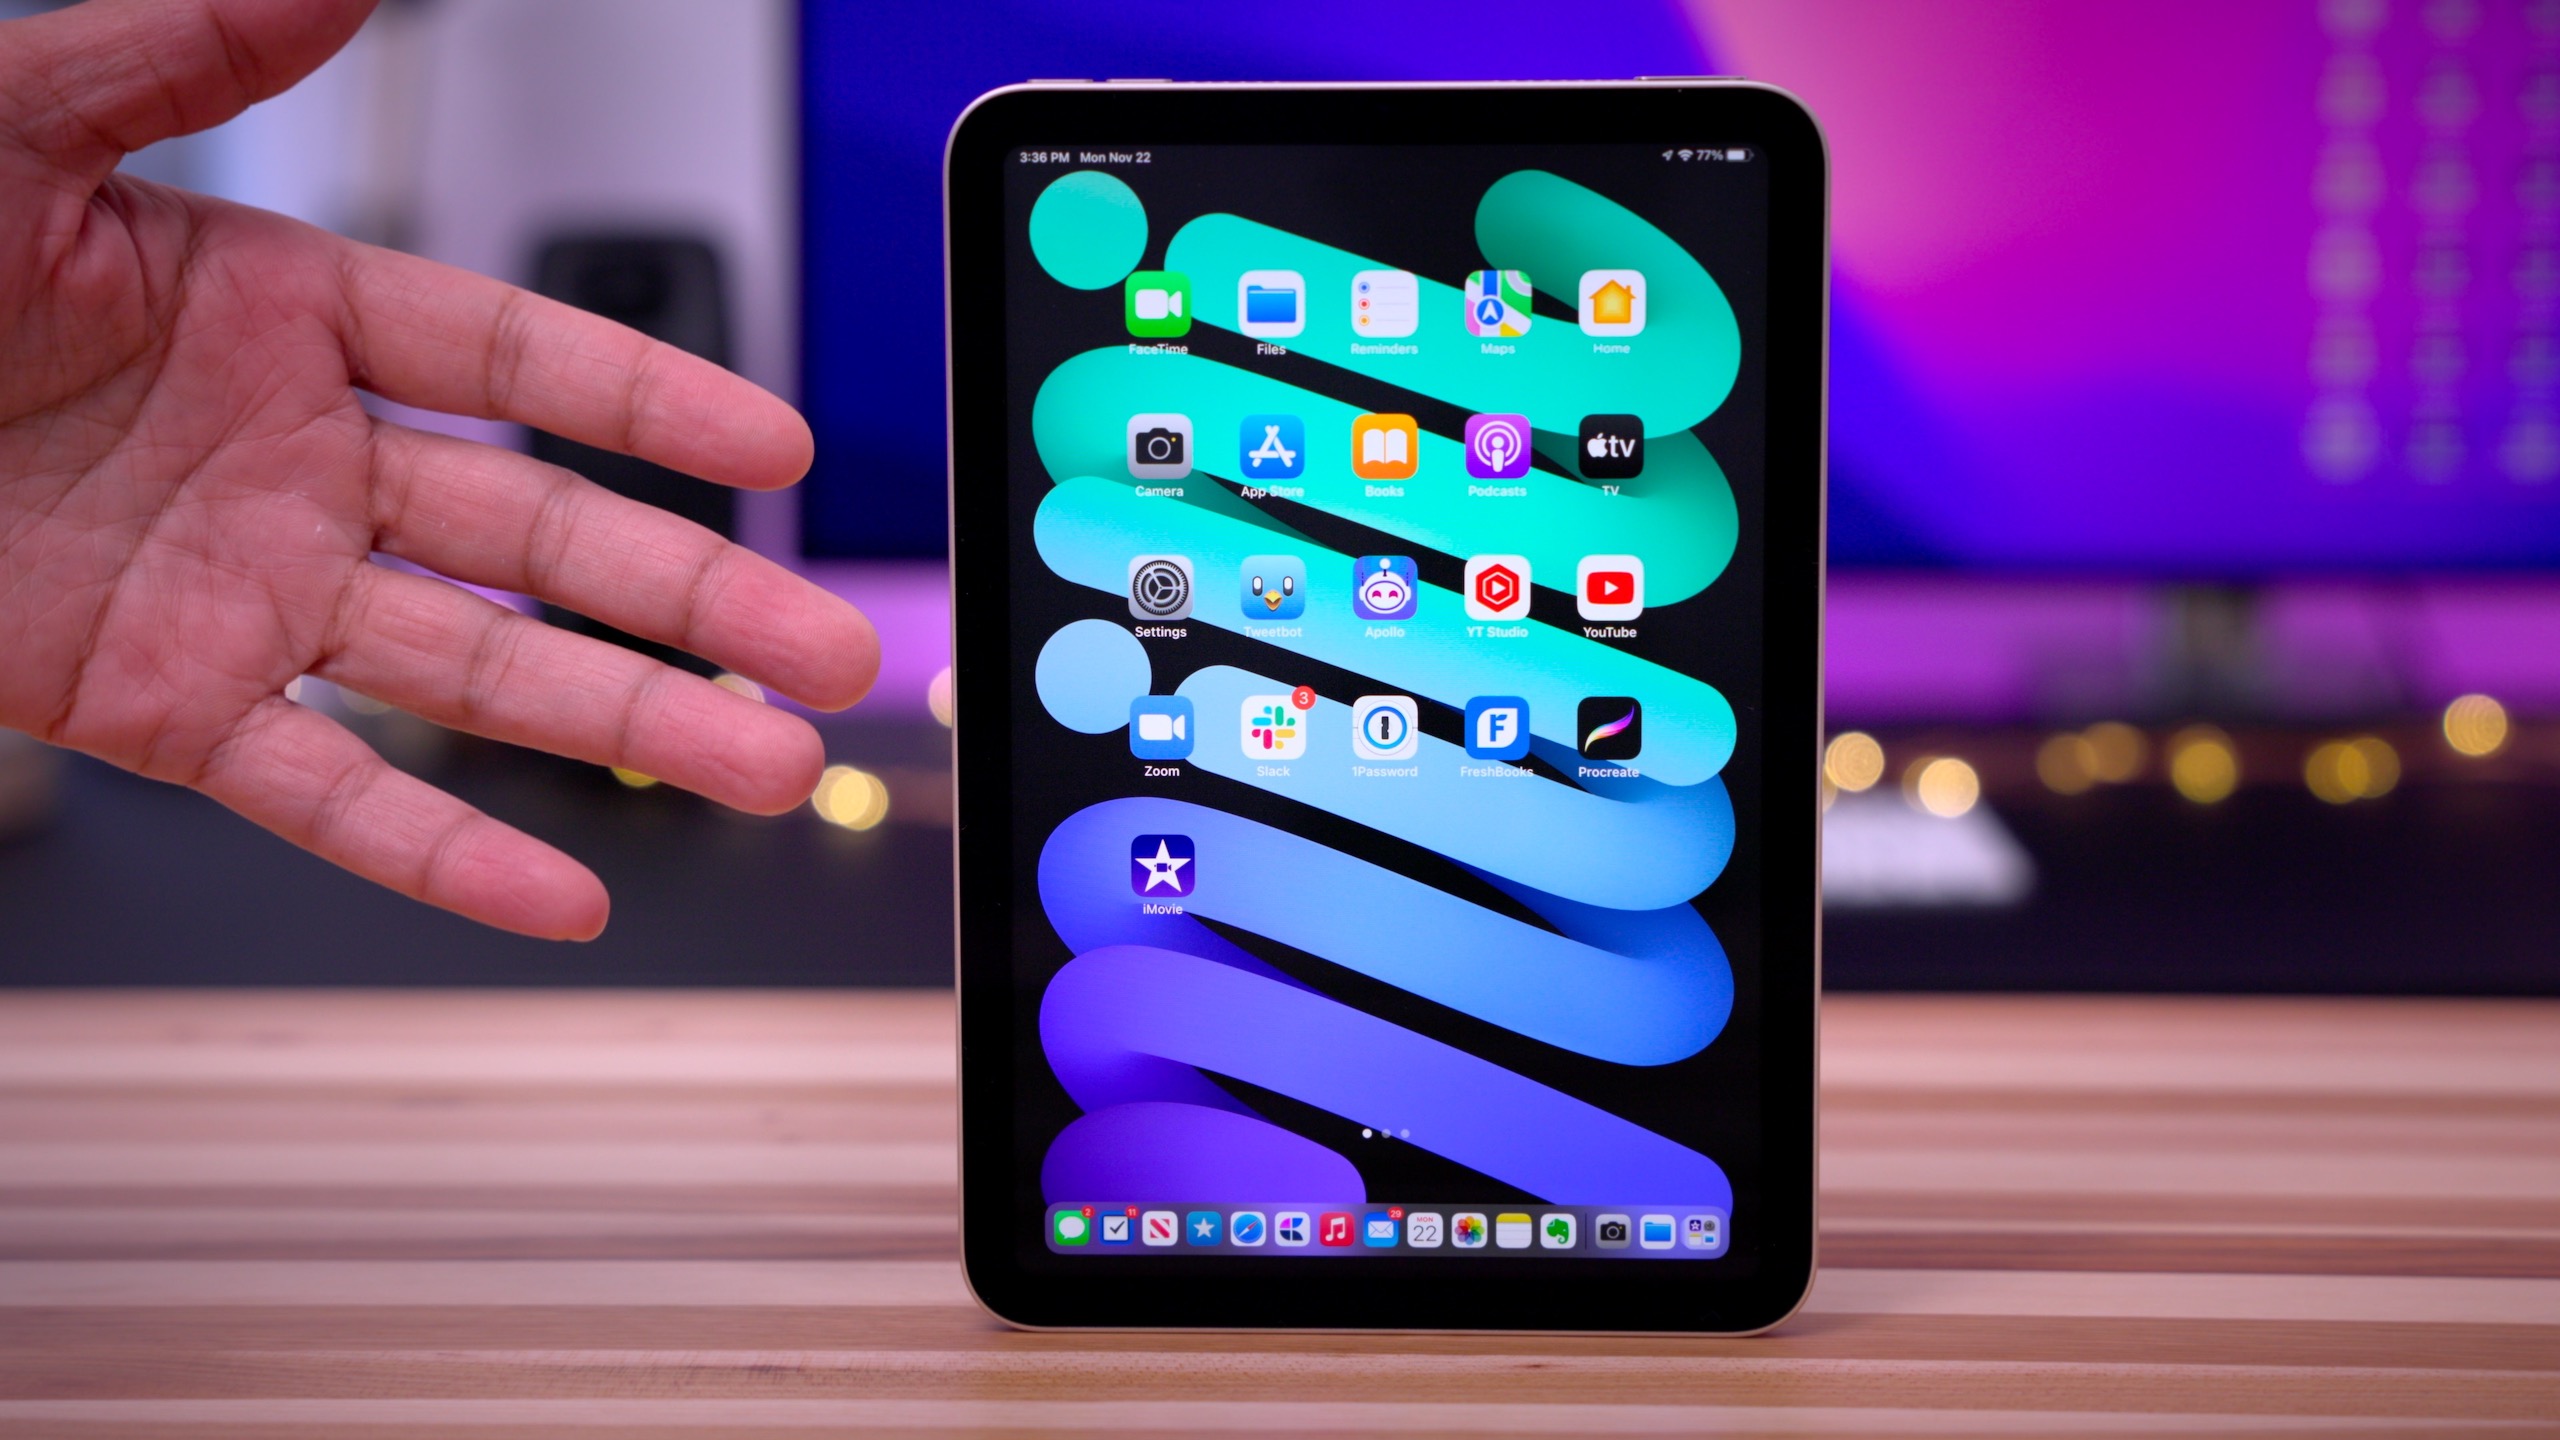 iPad mini 6 owners experiencing charging issues after iPadOS 15.5 update.